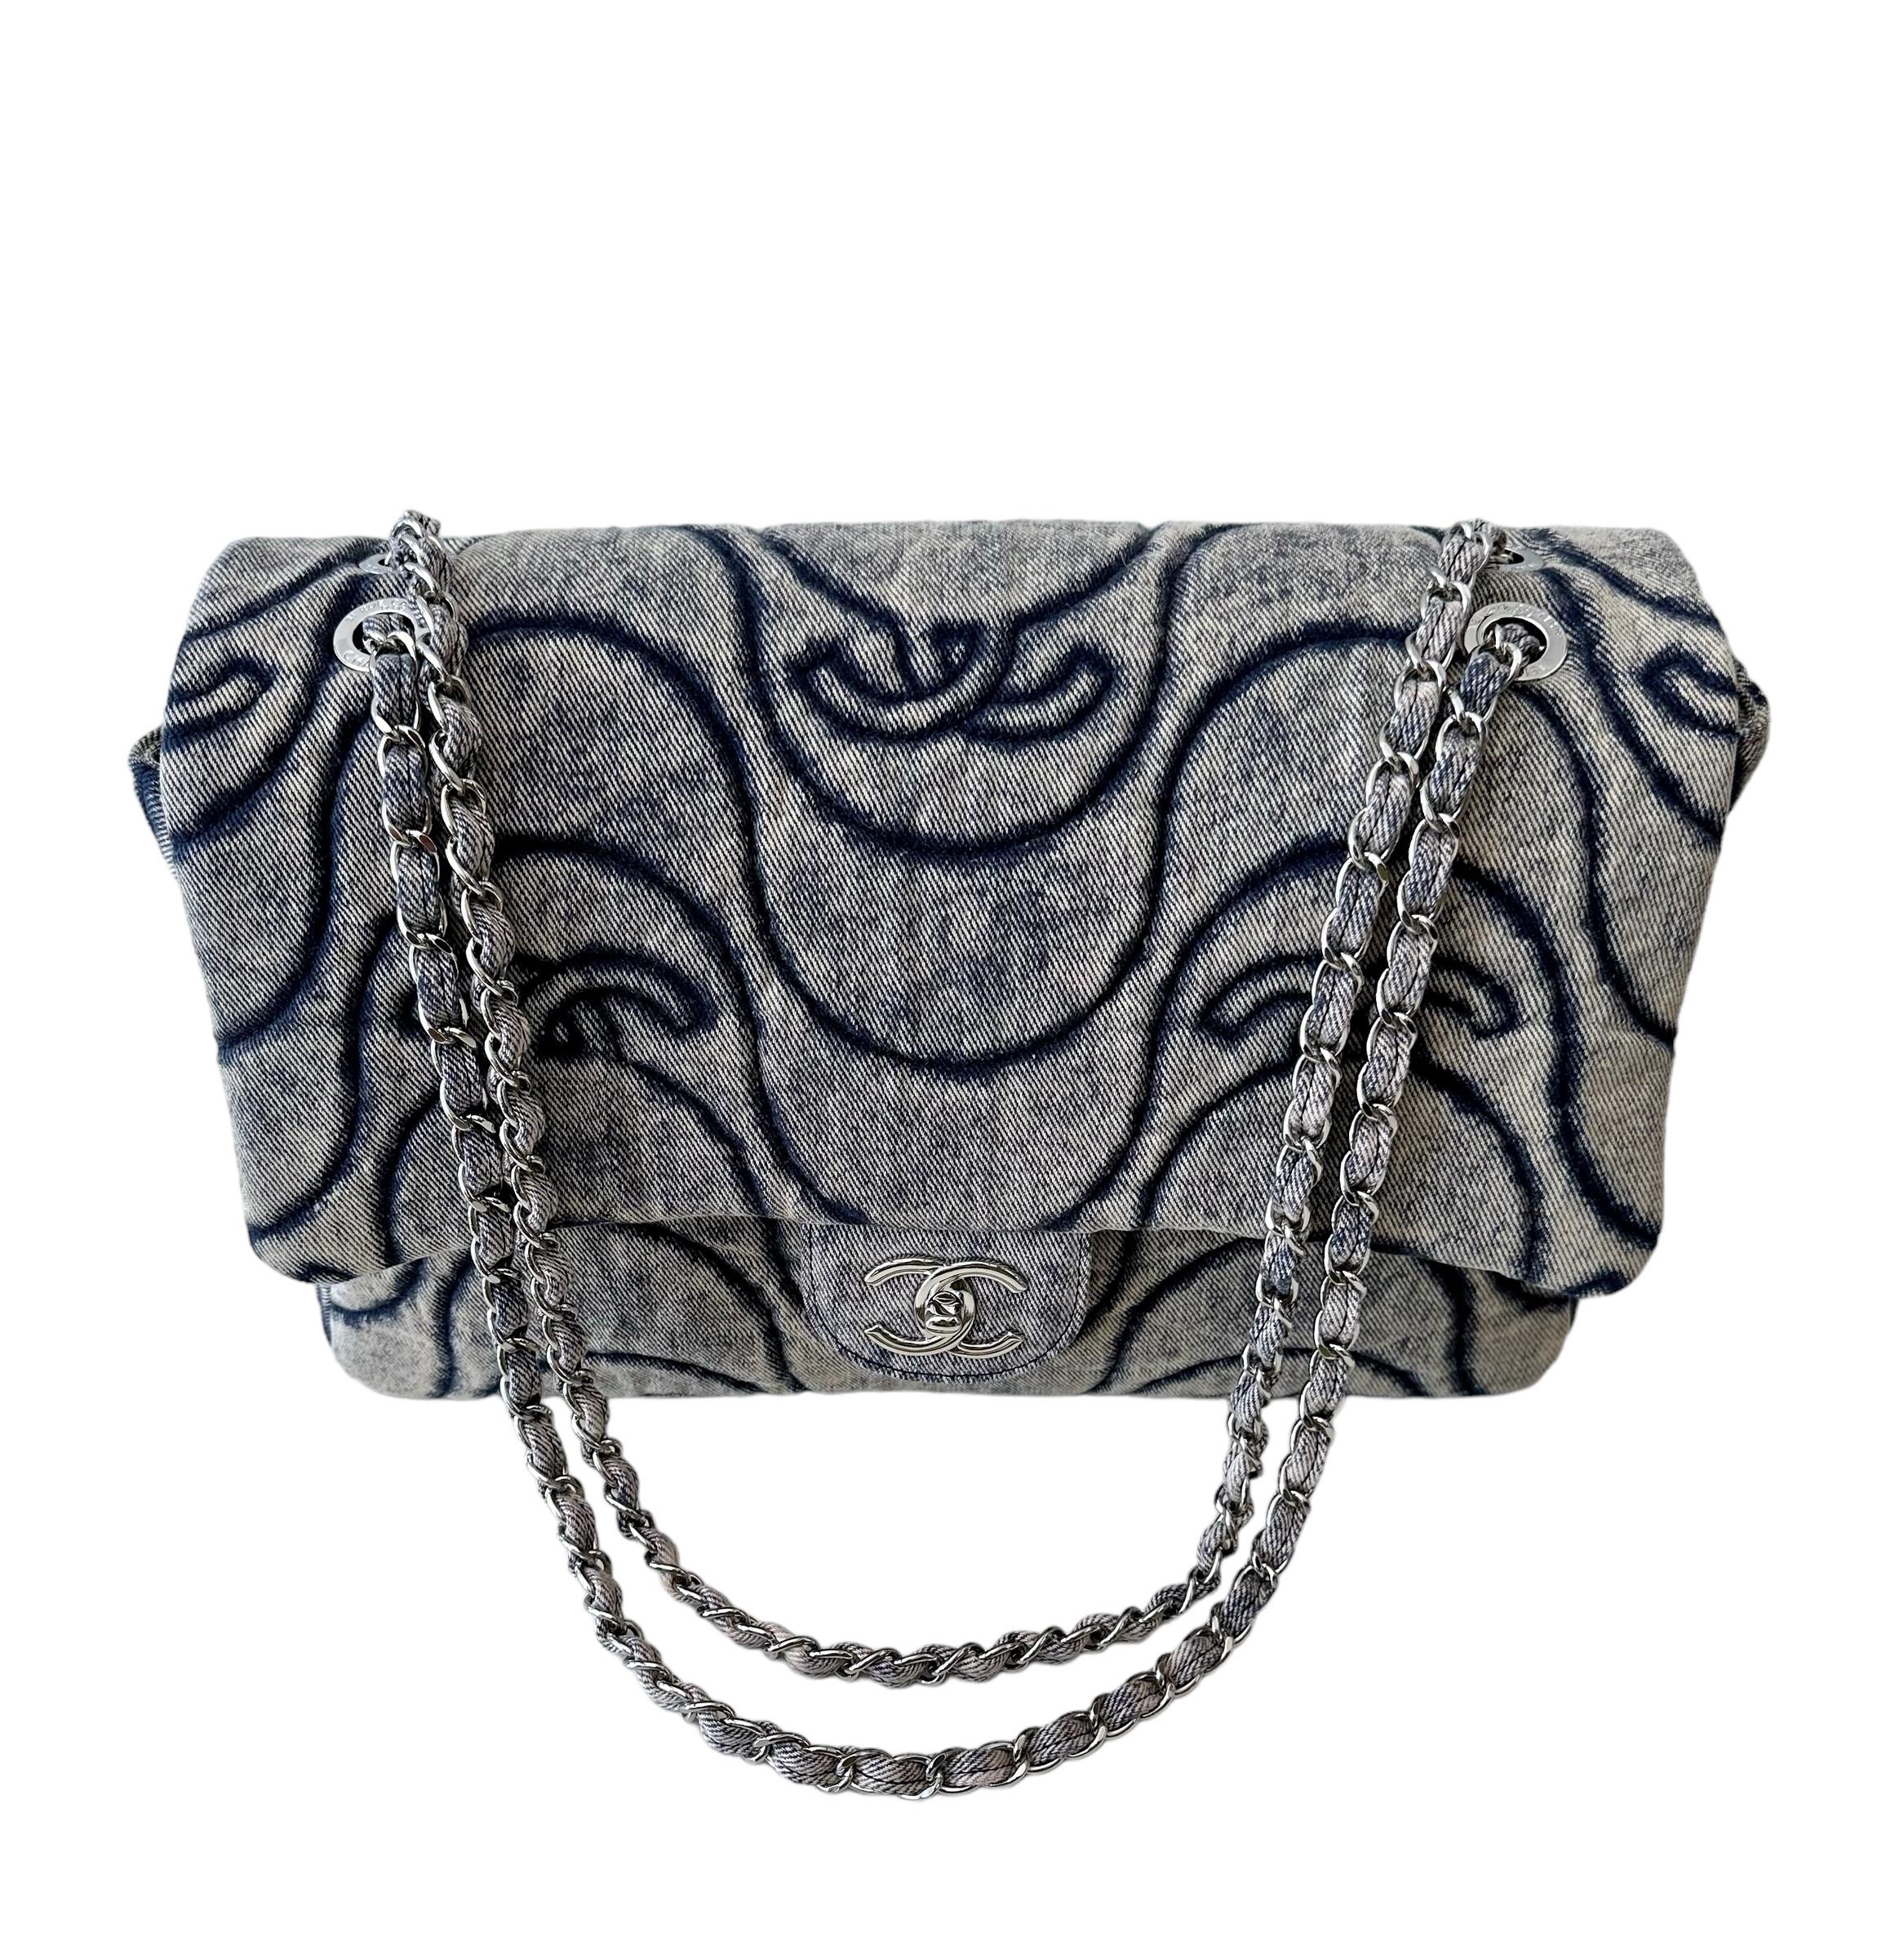 This pre-owned denim embossed Timeless CC Flap bag from the house of Chanel is in perfect condition.
It is crafted of fadded blue denim.
It features a silver chain denim-threaded shoulder strap and a flap with a matching silver Chanel CC turn-lock.